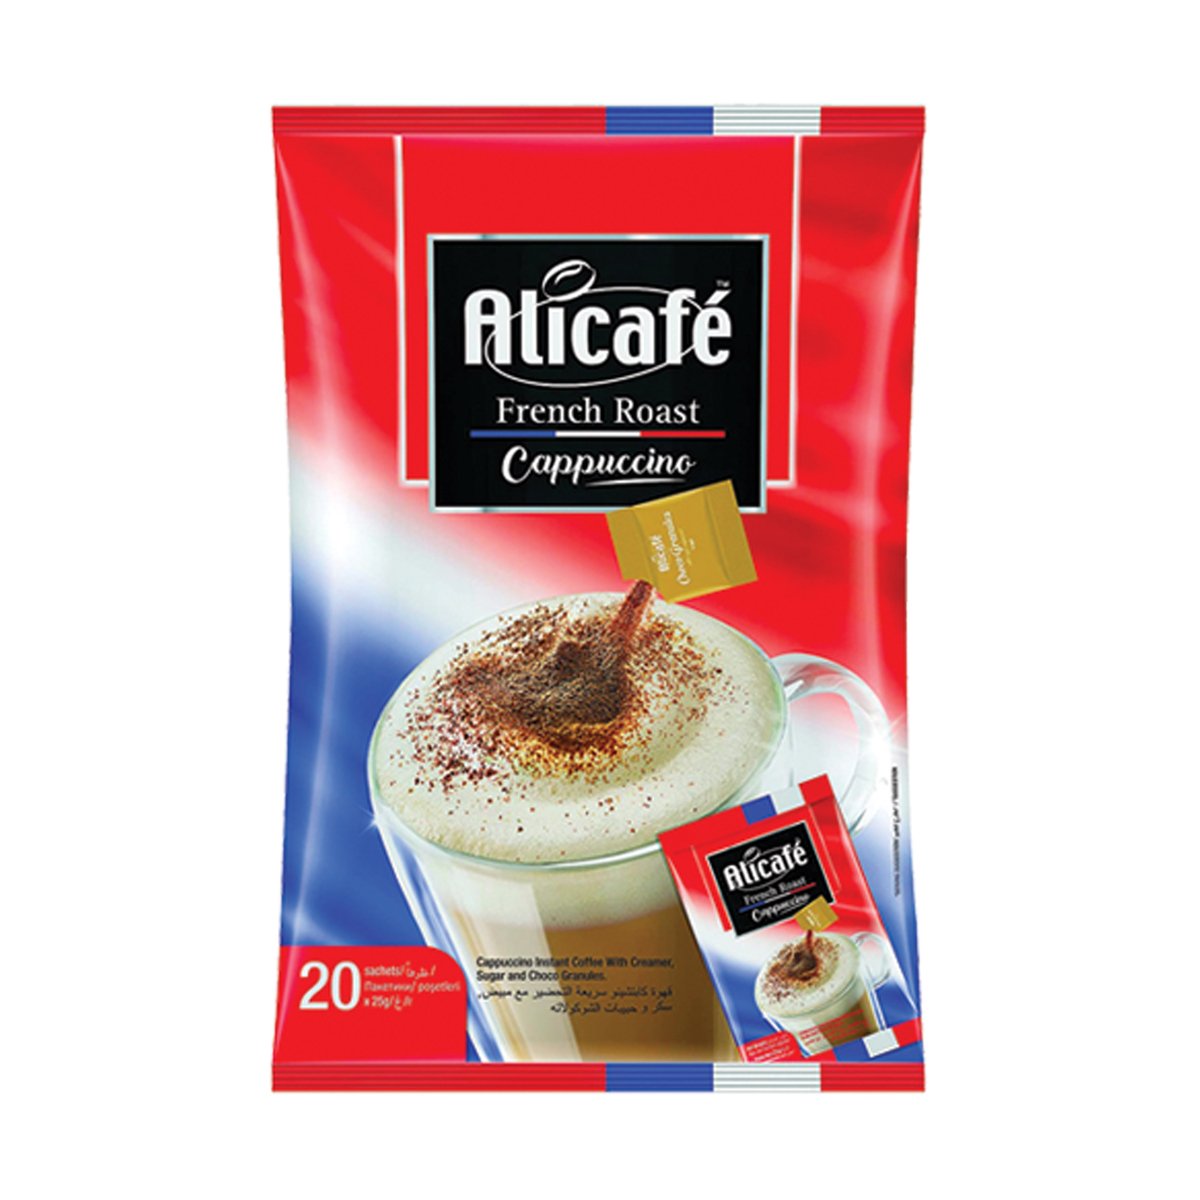 Alicafe French Roast Cappuccino 25g